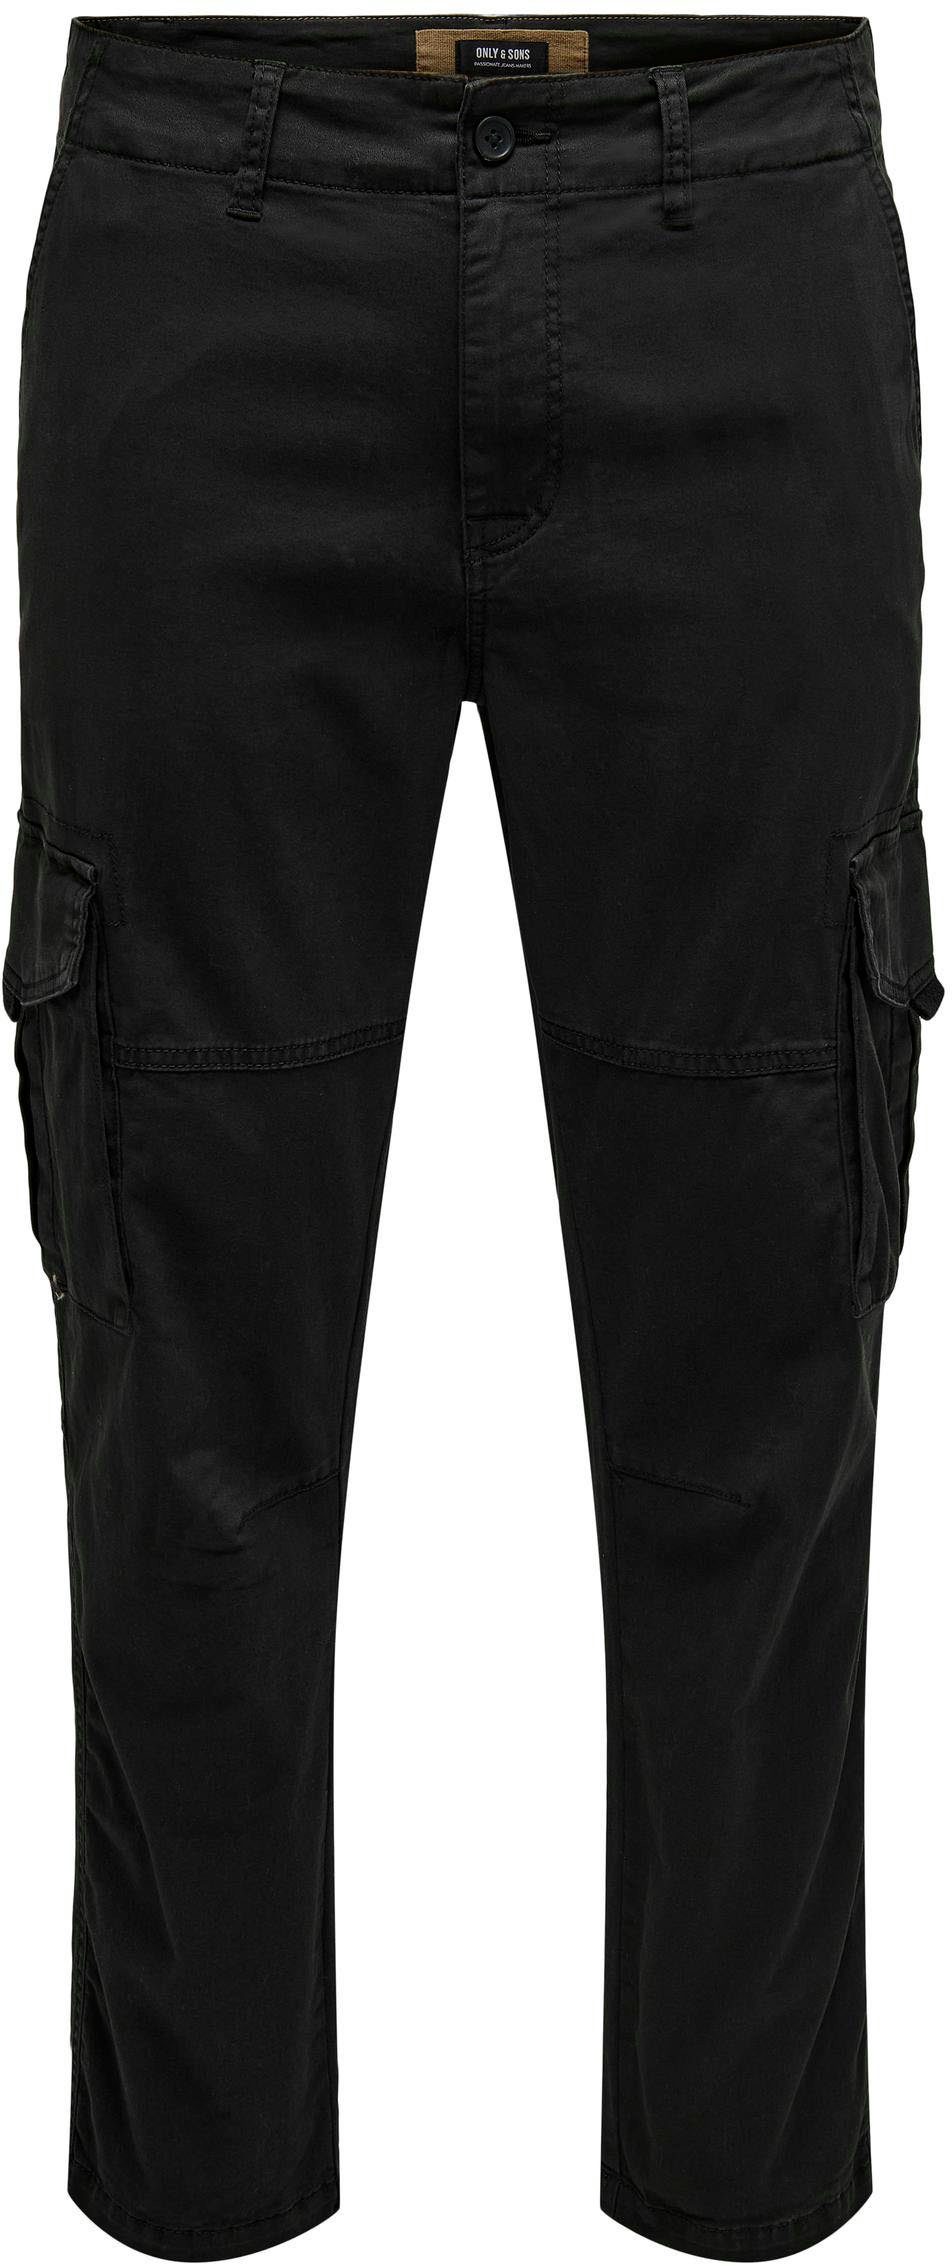 CARGO SONS LIFE OS ONLY Cargohose TAP & black ONSDEAN